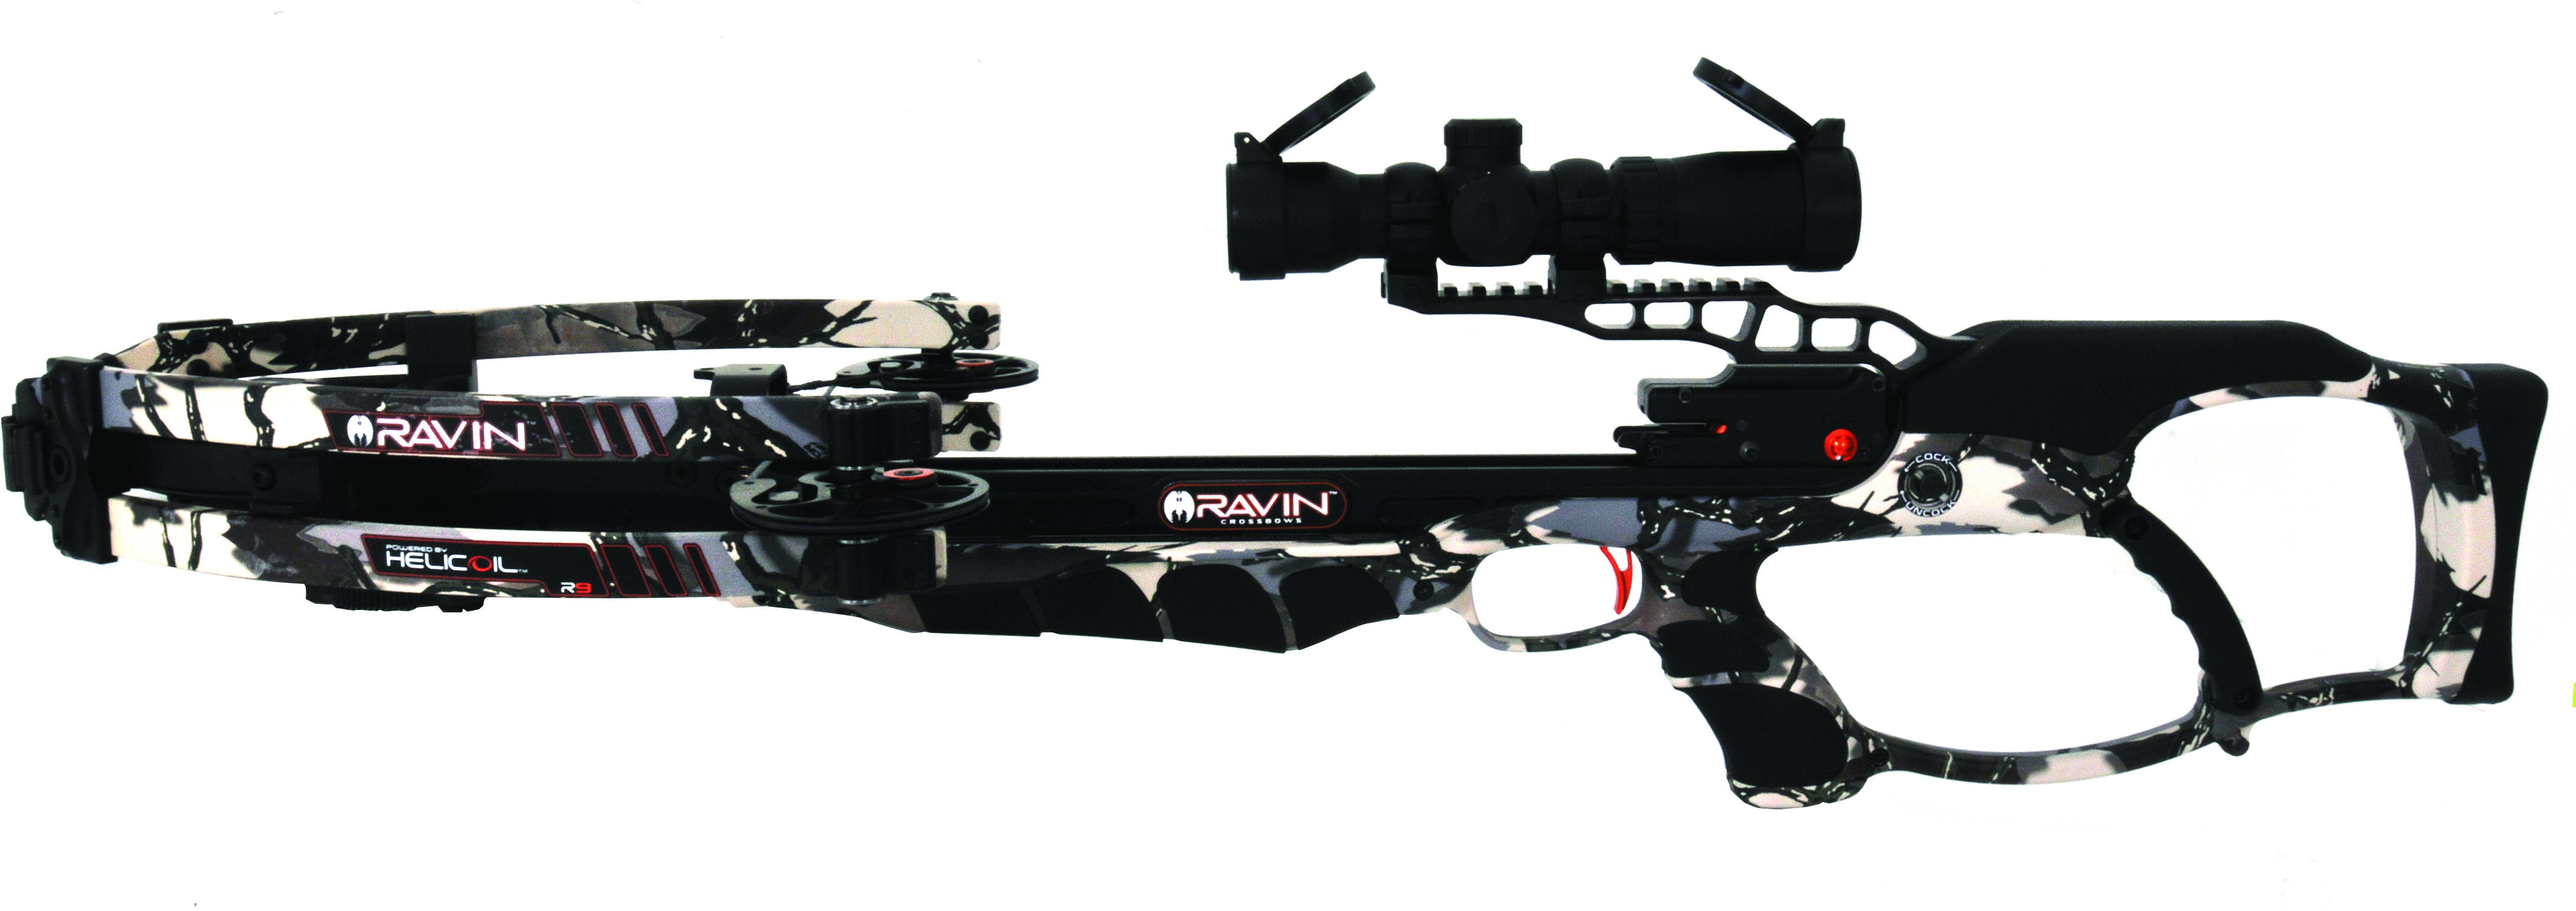 Crossbow Review: Ravin R9